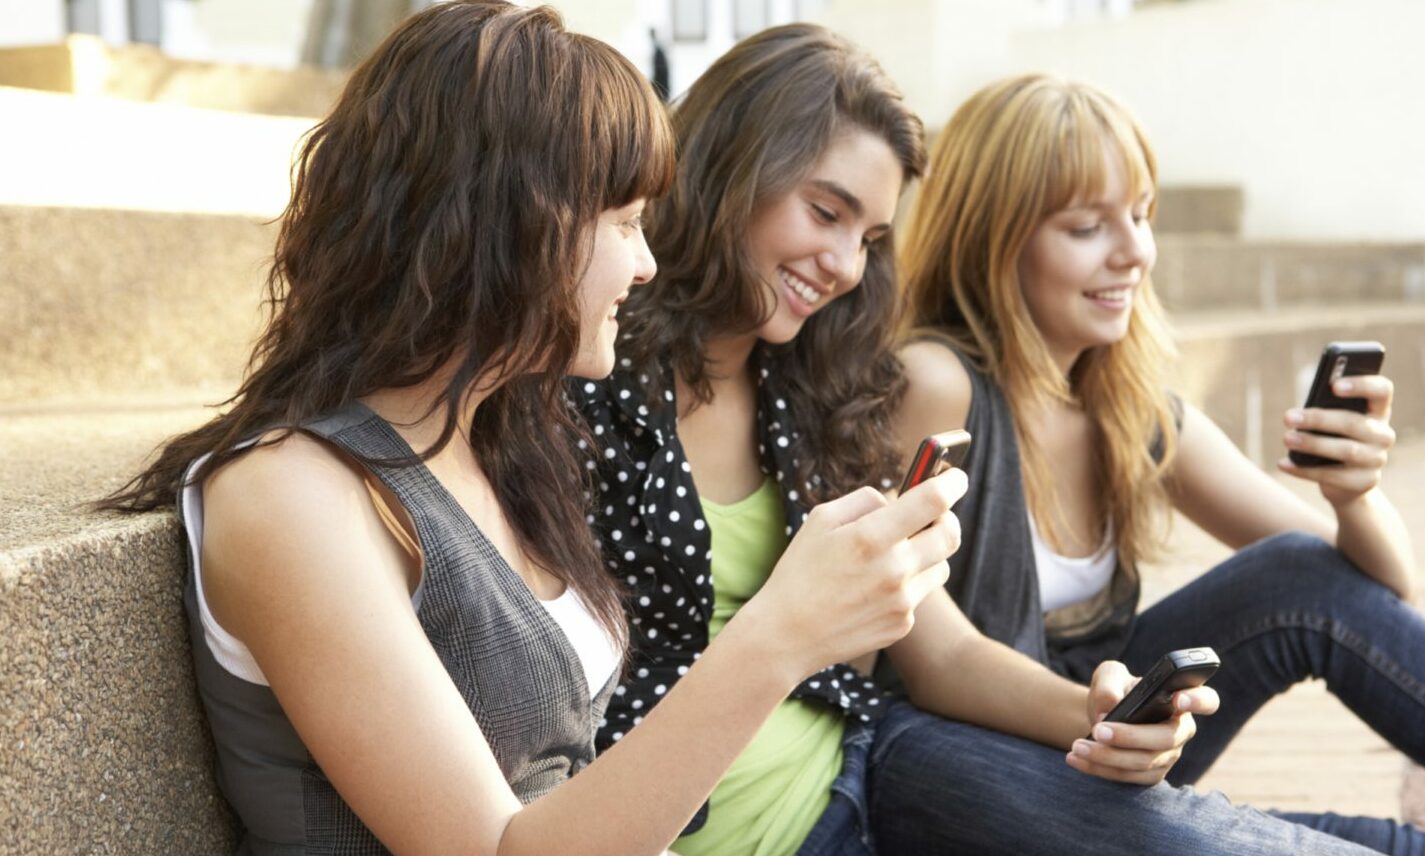 It is thought an increase in virtual interactions - such as texting and online messaging - have impacted the teen pregnancy rate in Scotland.